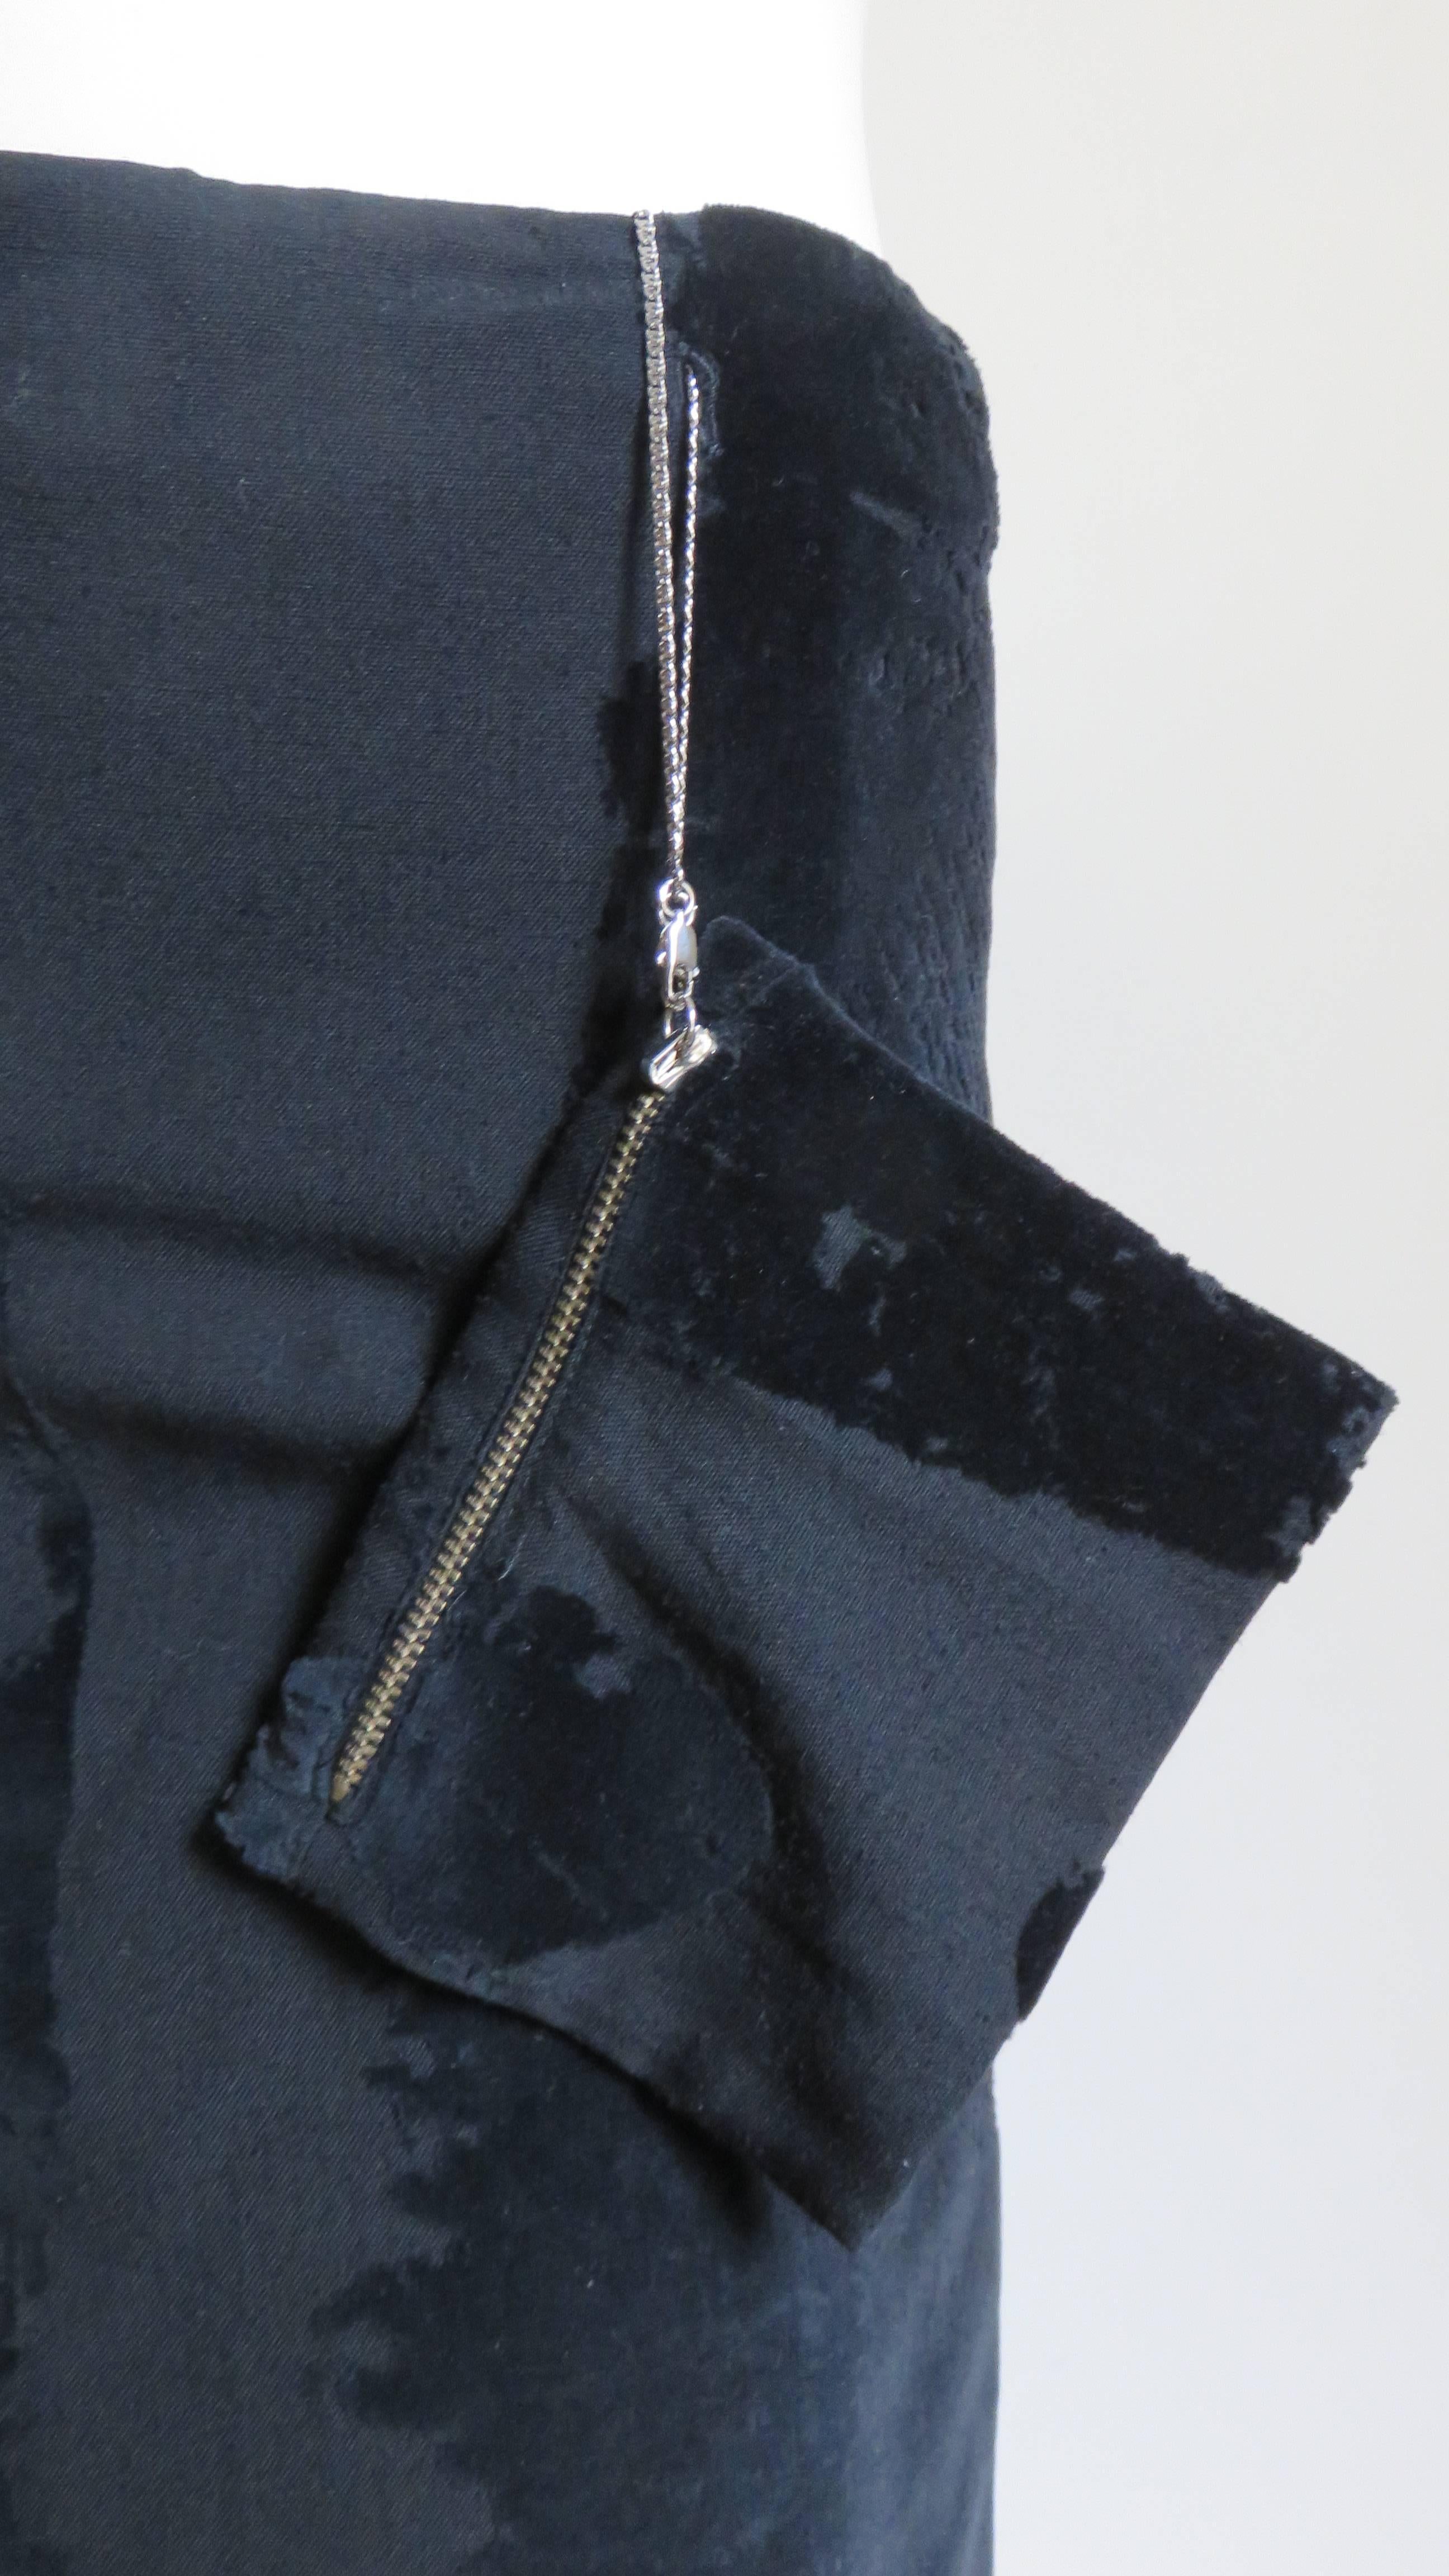 Black Jean Paul Gaultier Skirt with Zipper Pouch 1990s For Sale